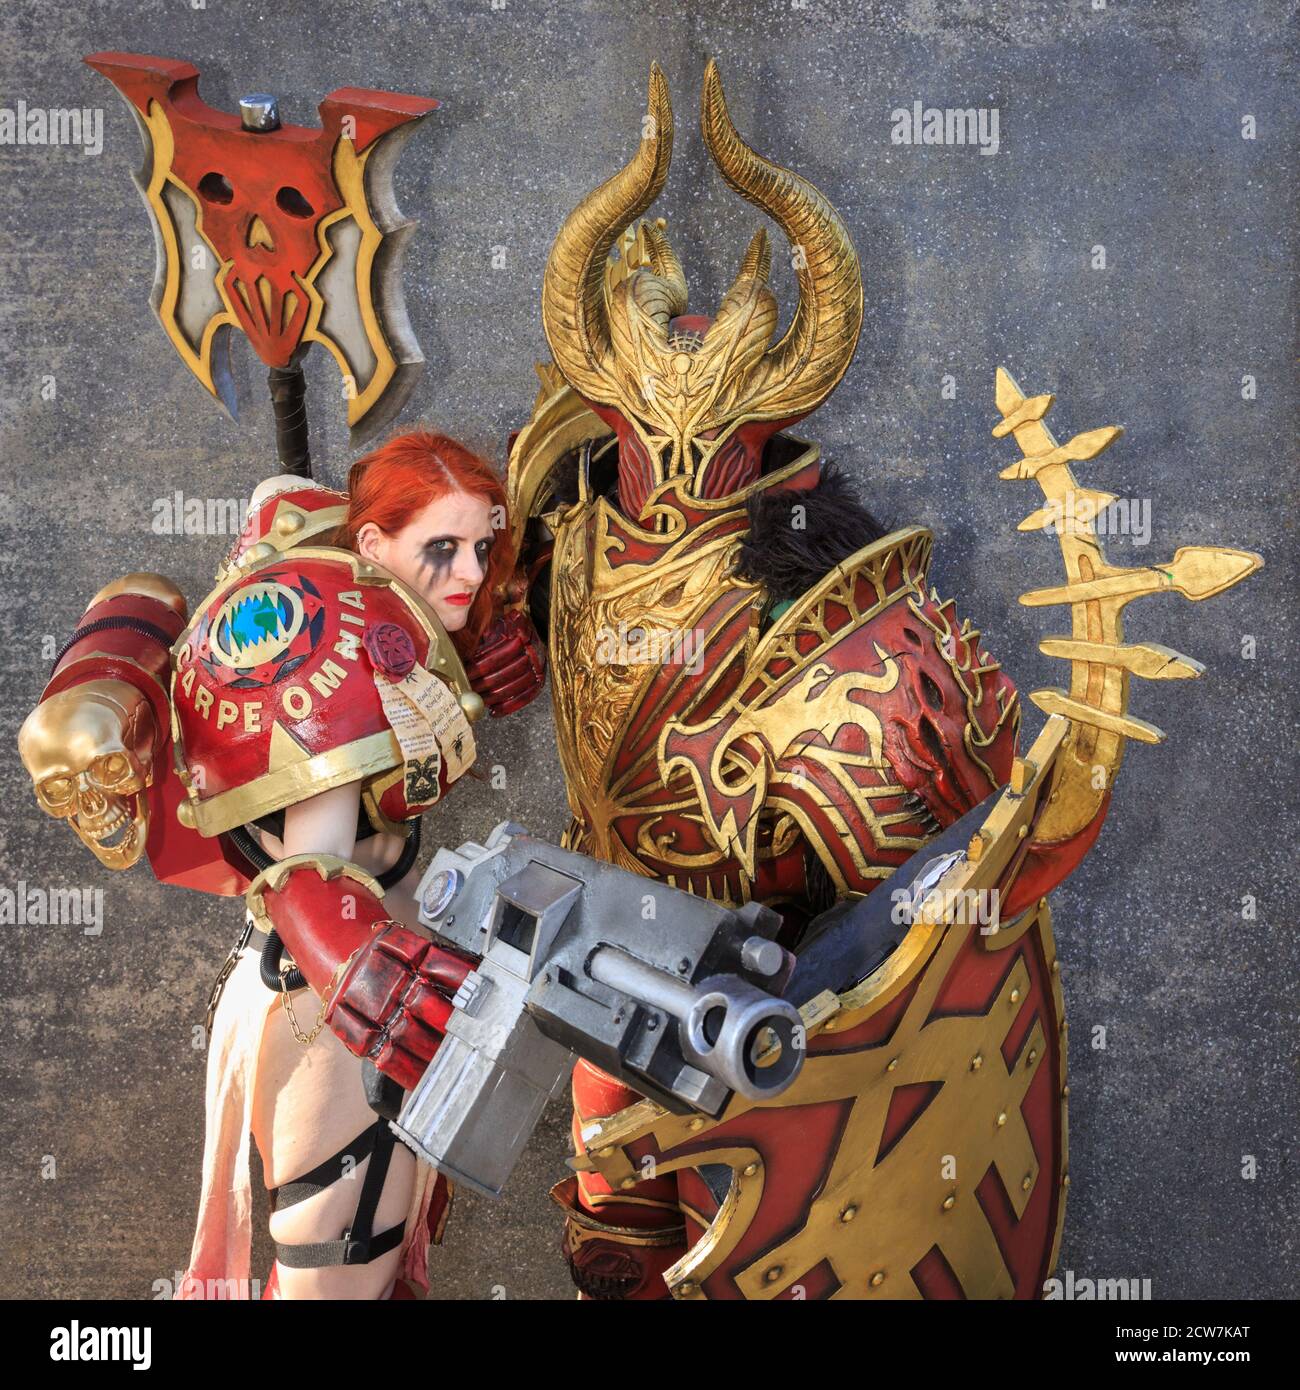 Two concept art characters from Warhammer 40K pose in their elaborate cosplayer outfits at MCM Comicon London, UK Stock Photo